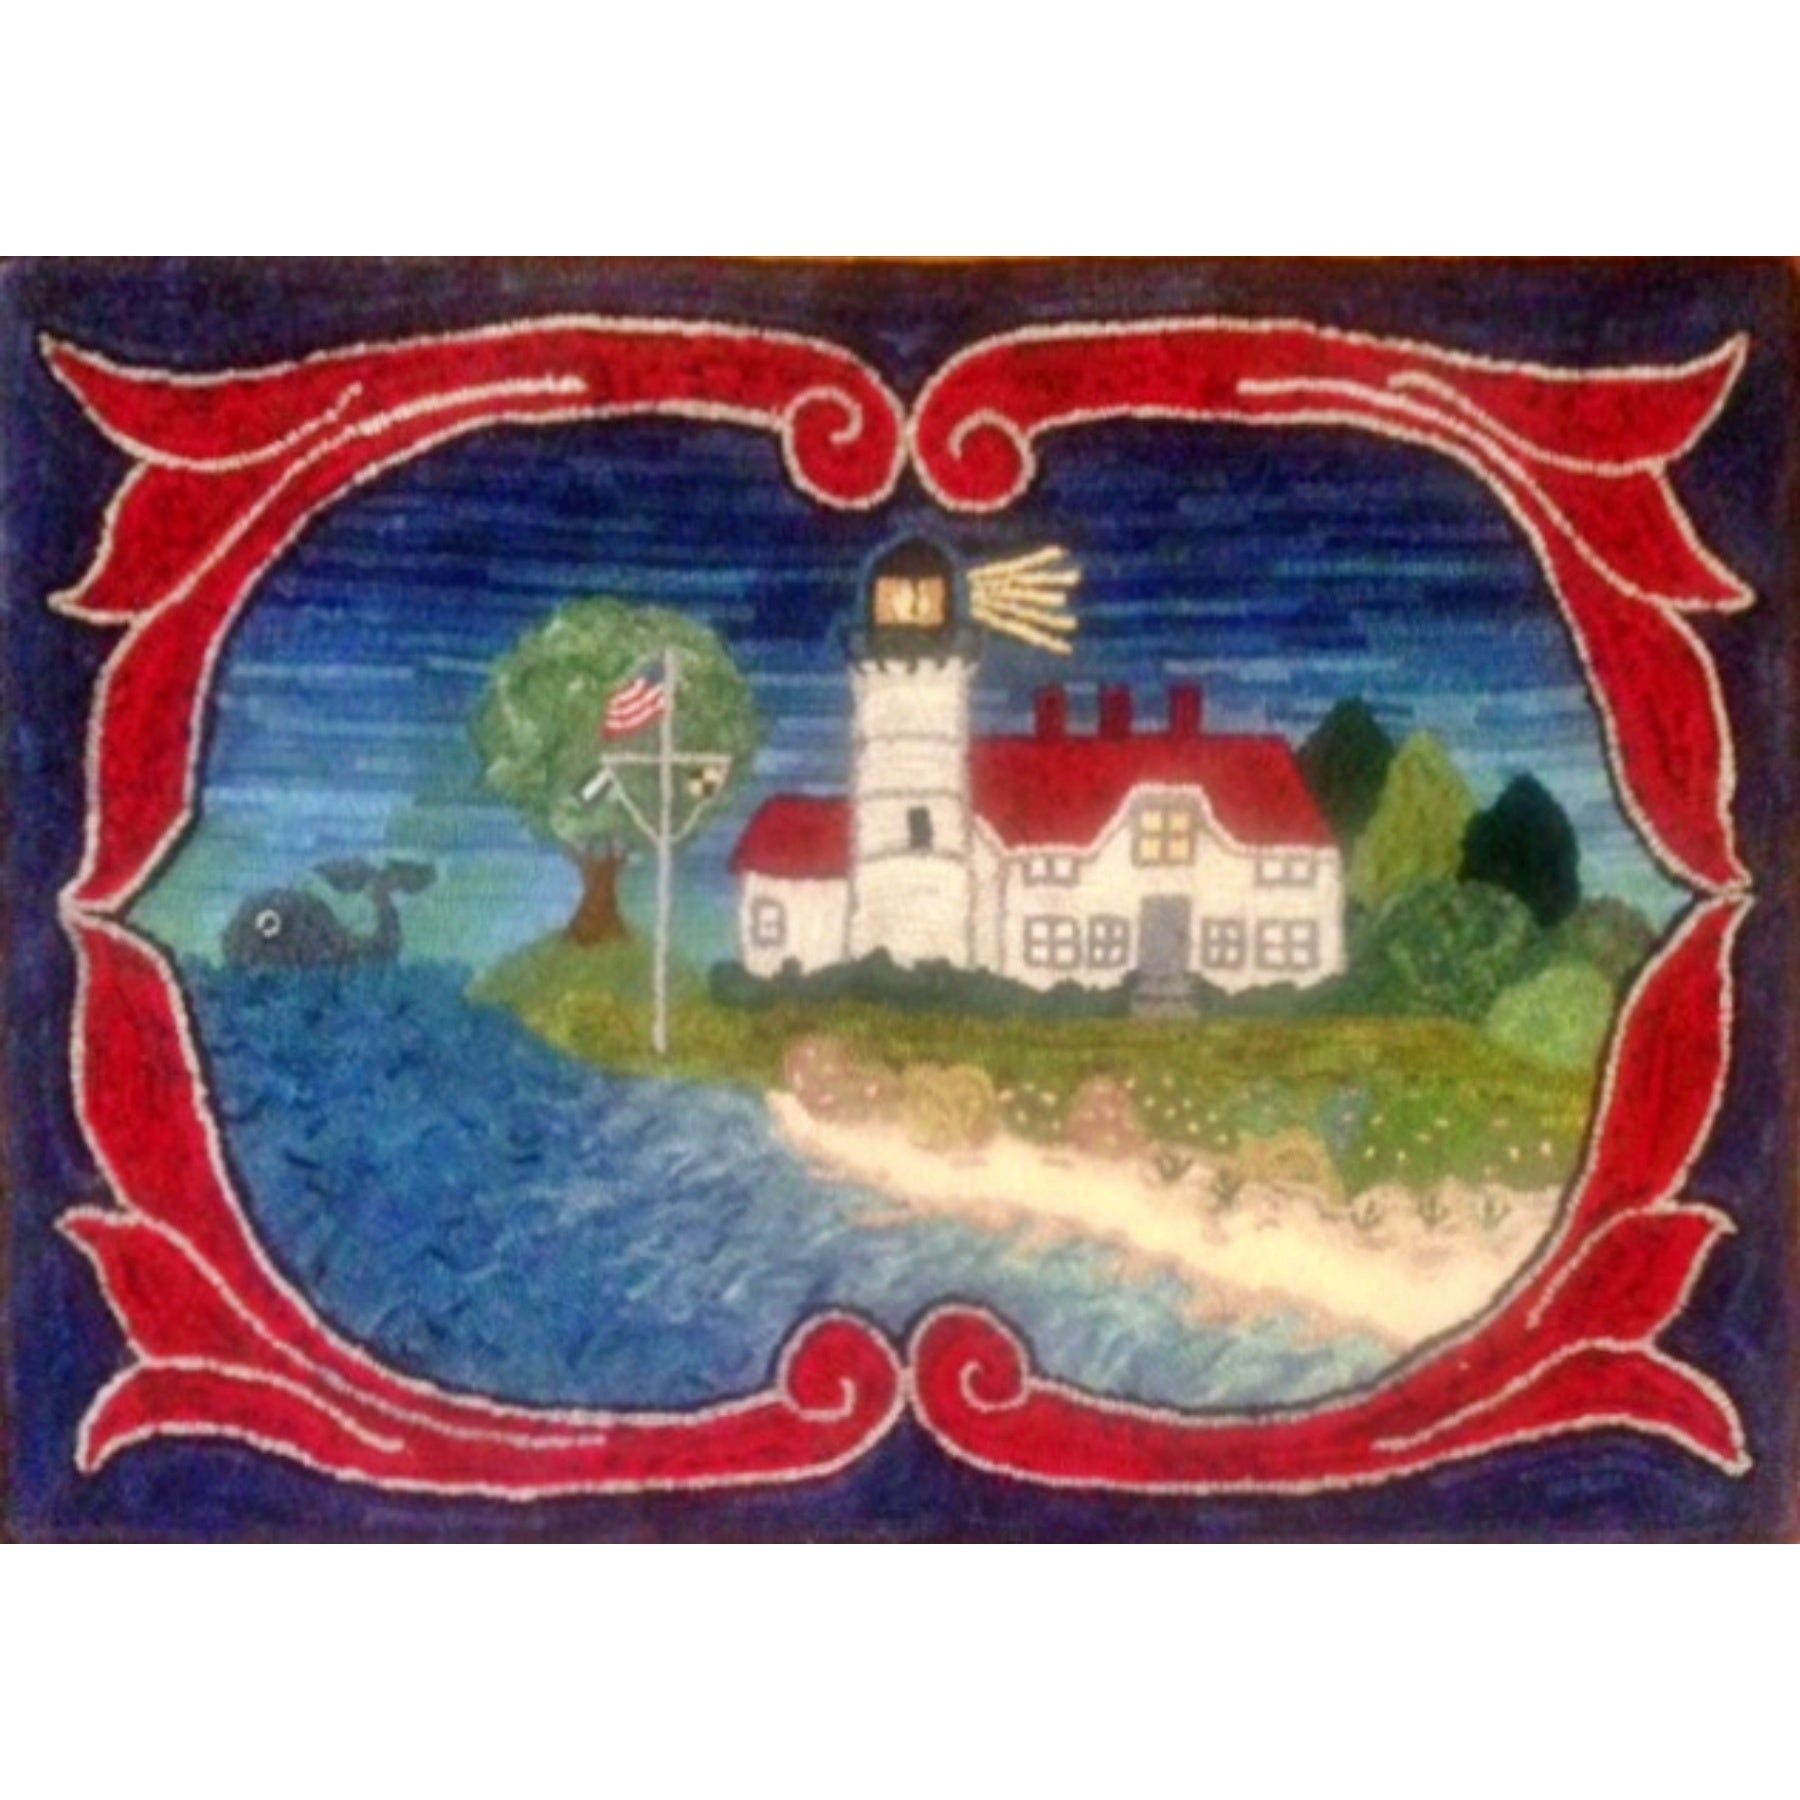 Chatham Light House, rug hooked by Jana Littlejohn (adapted)